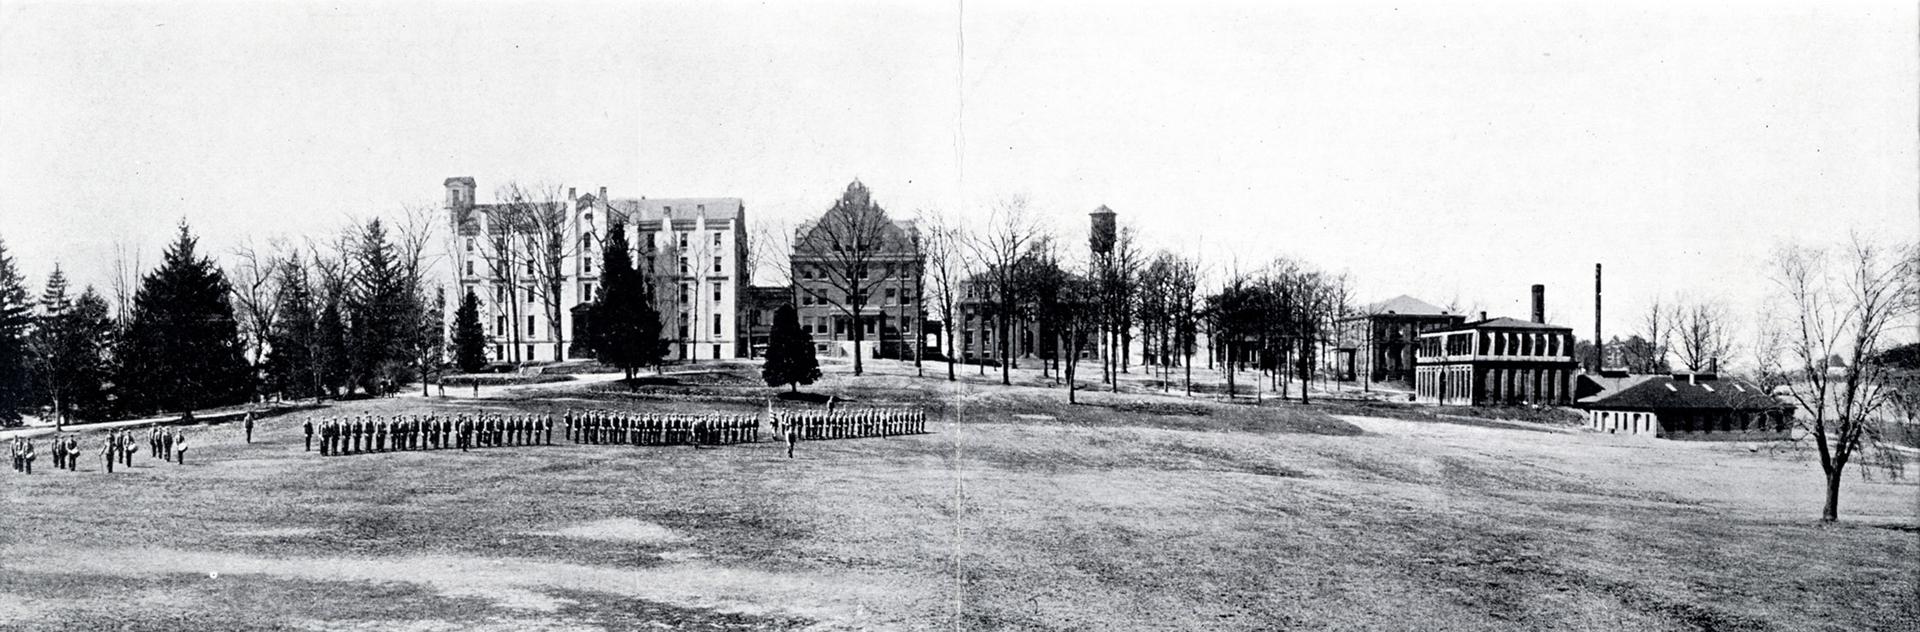 campus grounds in 1904 